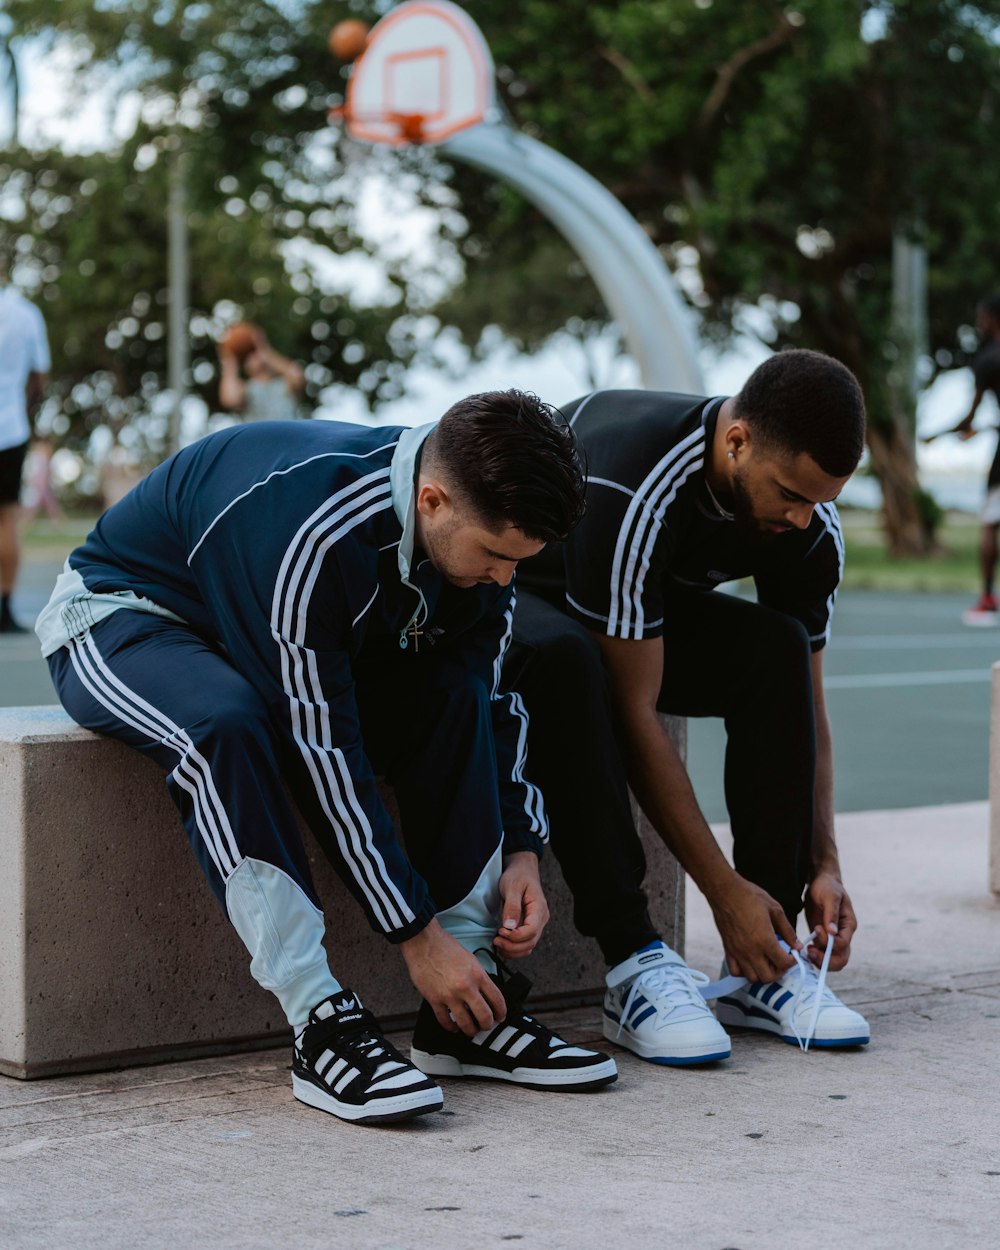 two young men are tying shoes on a bench